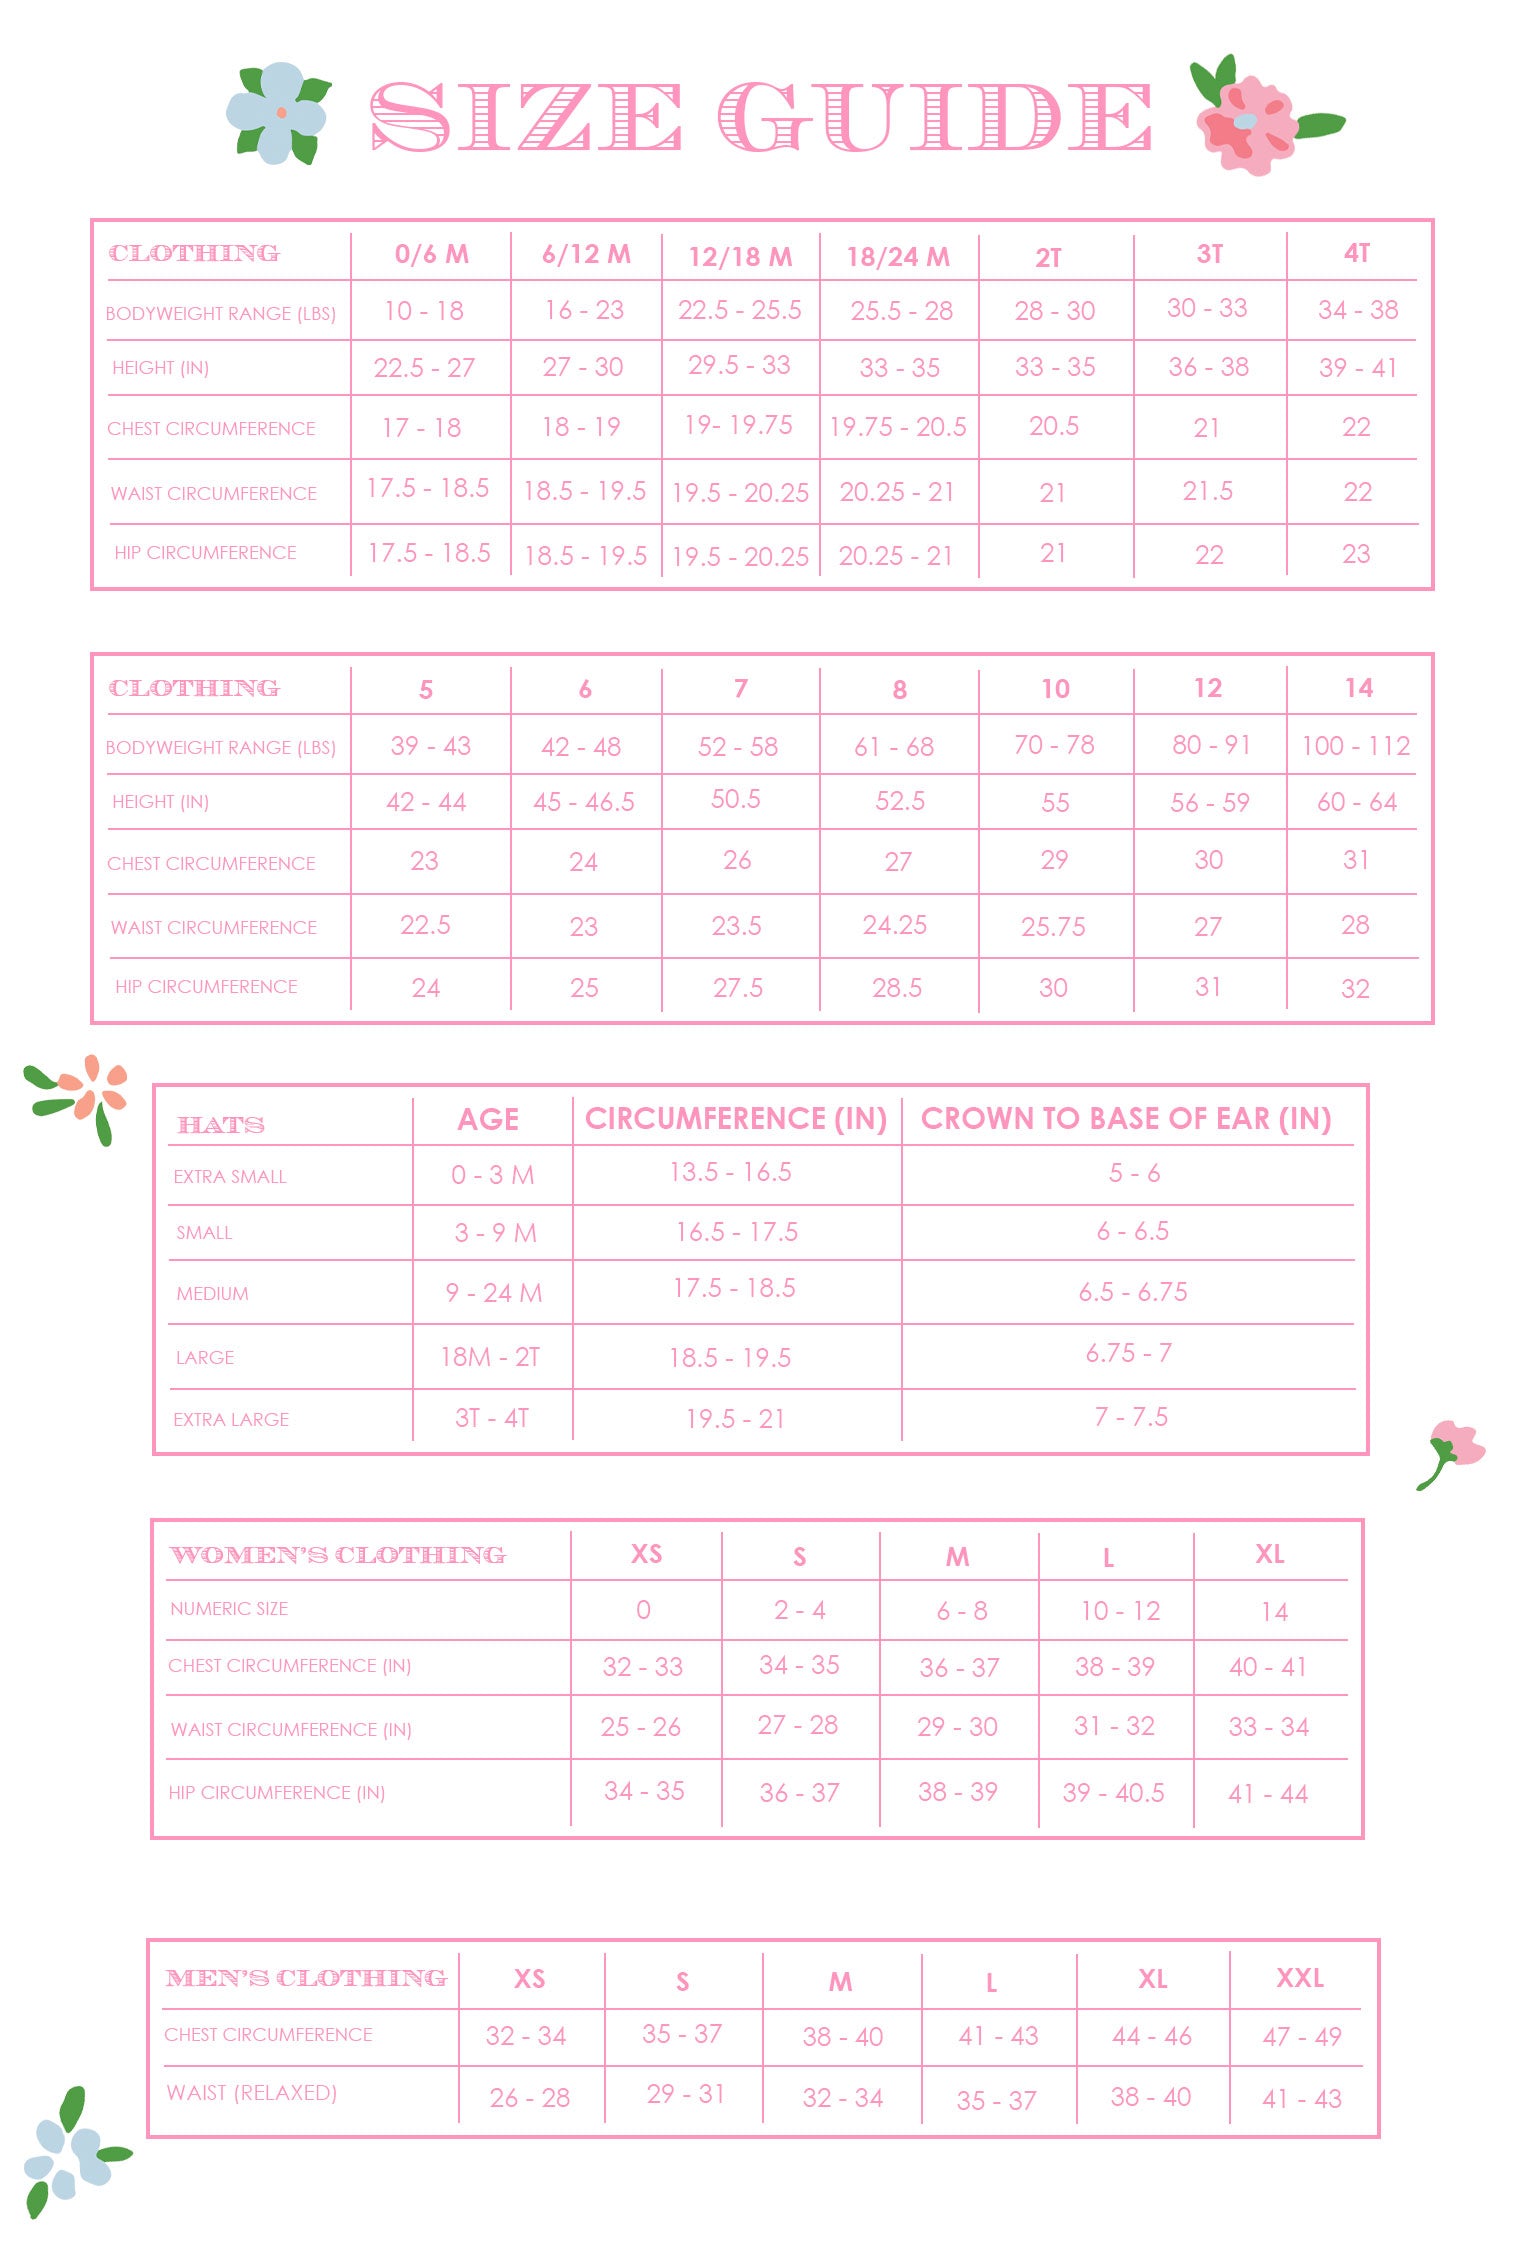 Hat Size Chart for Preemie through Adult {Free Printable} - Petals